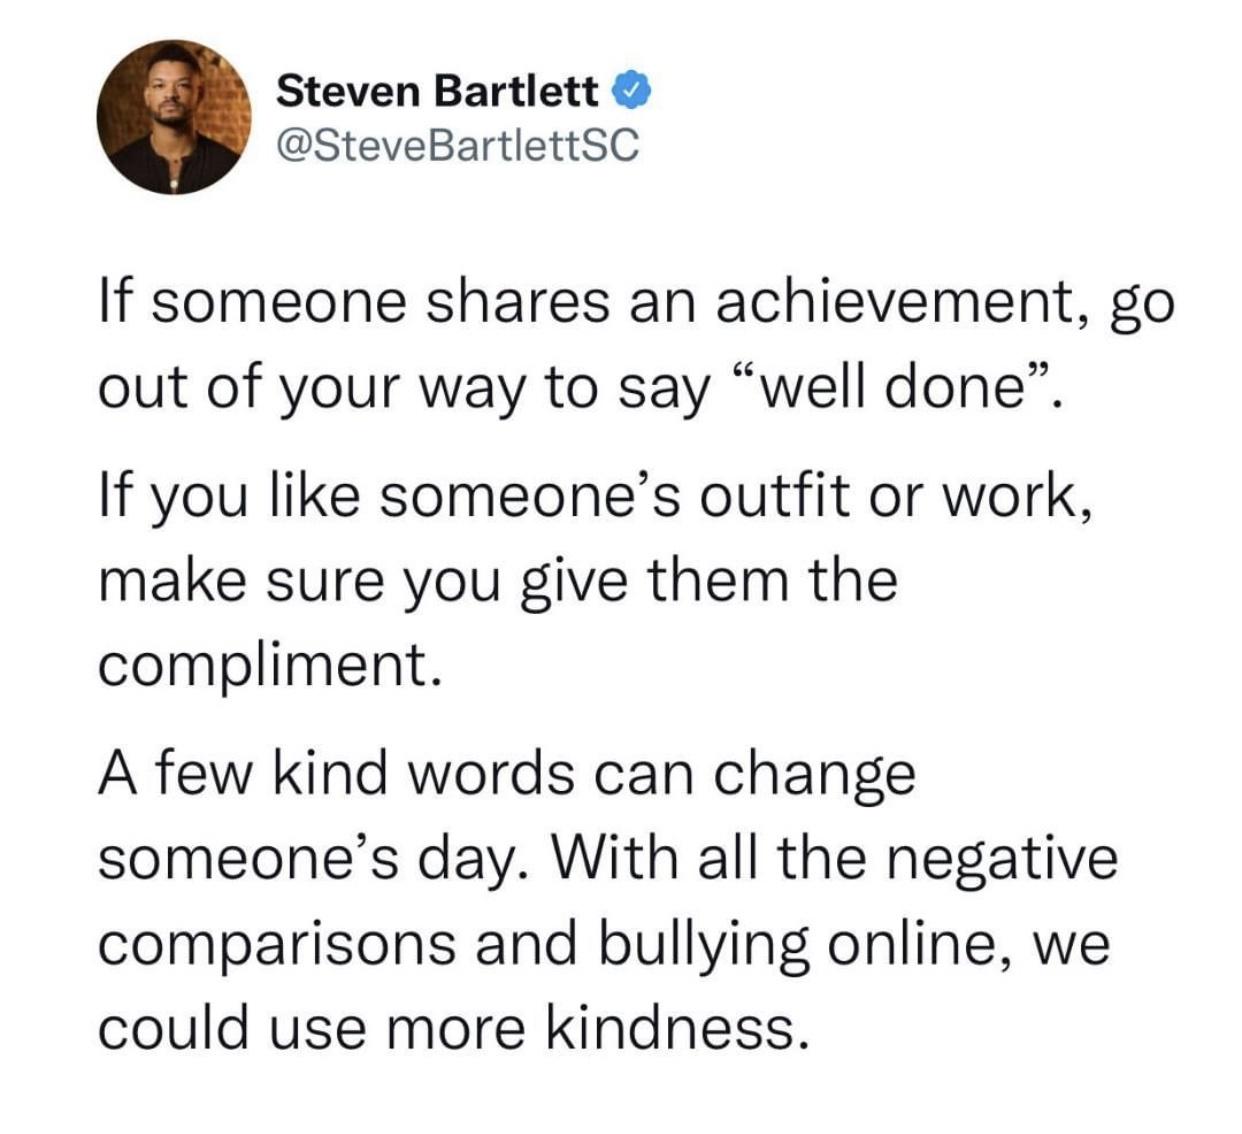 new memes - bi agenda - Steven Bartlett BartlettSC If someone an achievement, go out of your way to say well done. If you someone's outfit or work, make sure you give them the compliment. A few kind words can change someone's day. With all the negative co